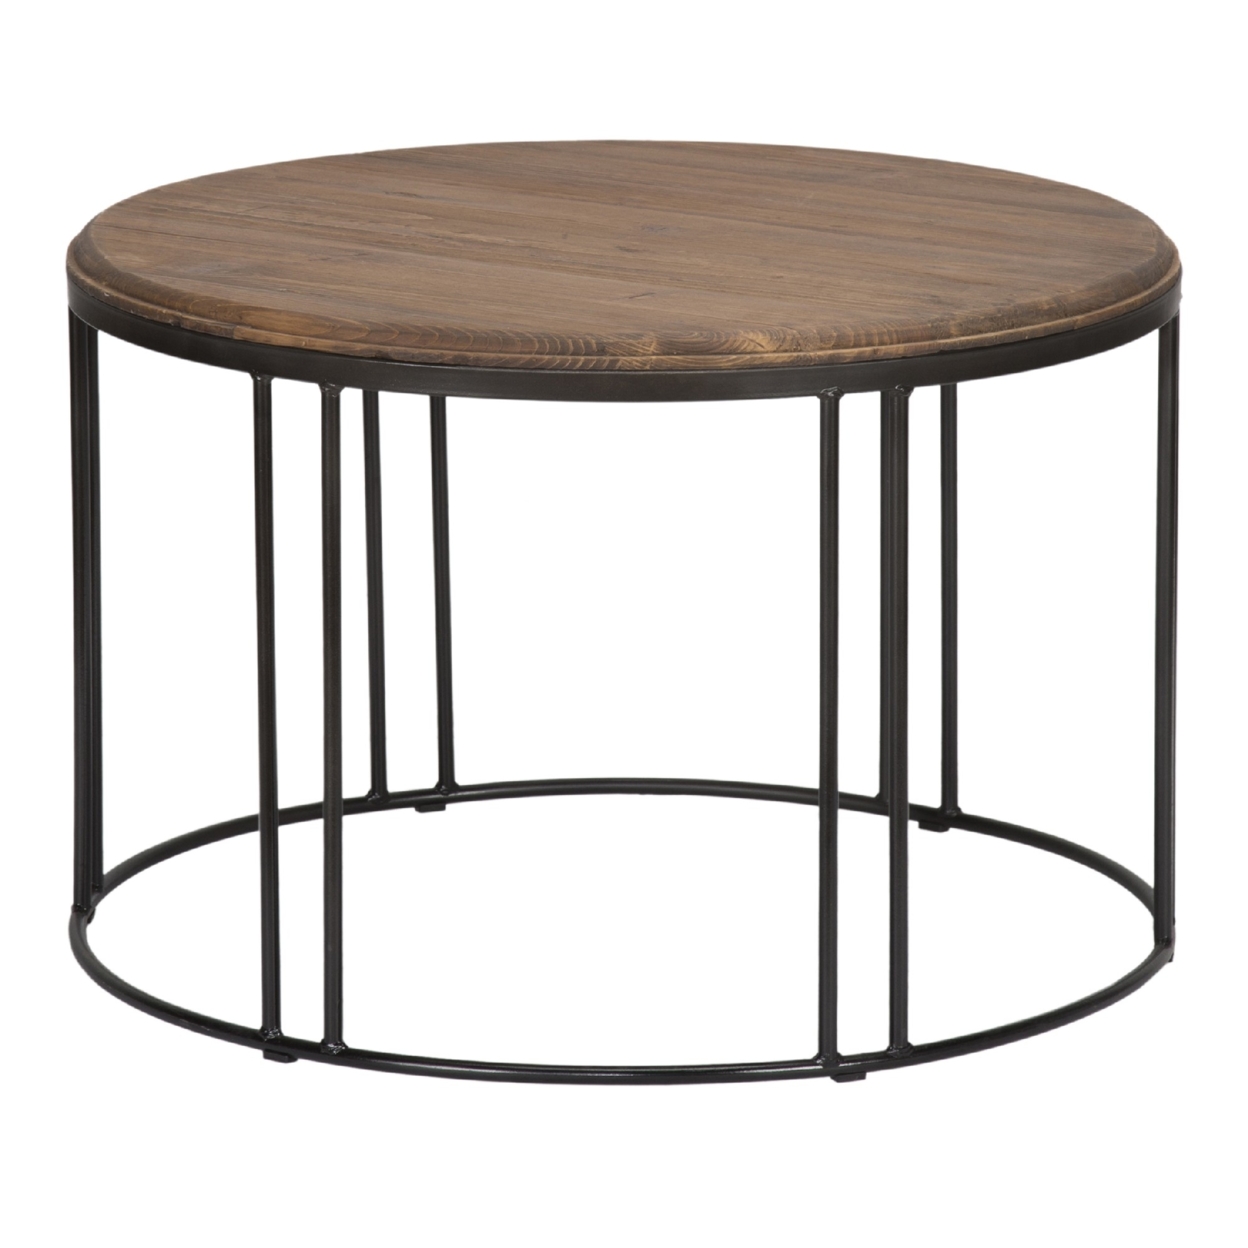 Iron Framed Round Coffee Table With Wooden Top, Brown And Black- Saltoro Sherpi